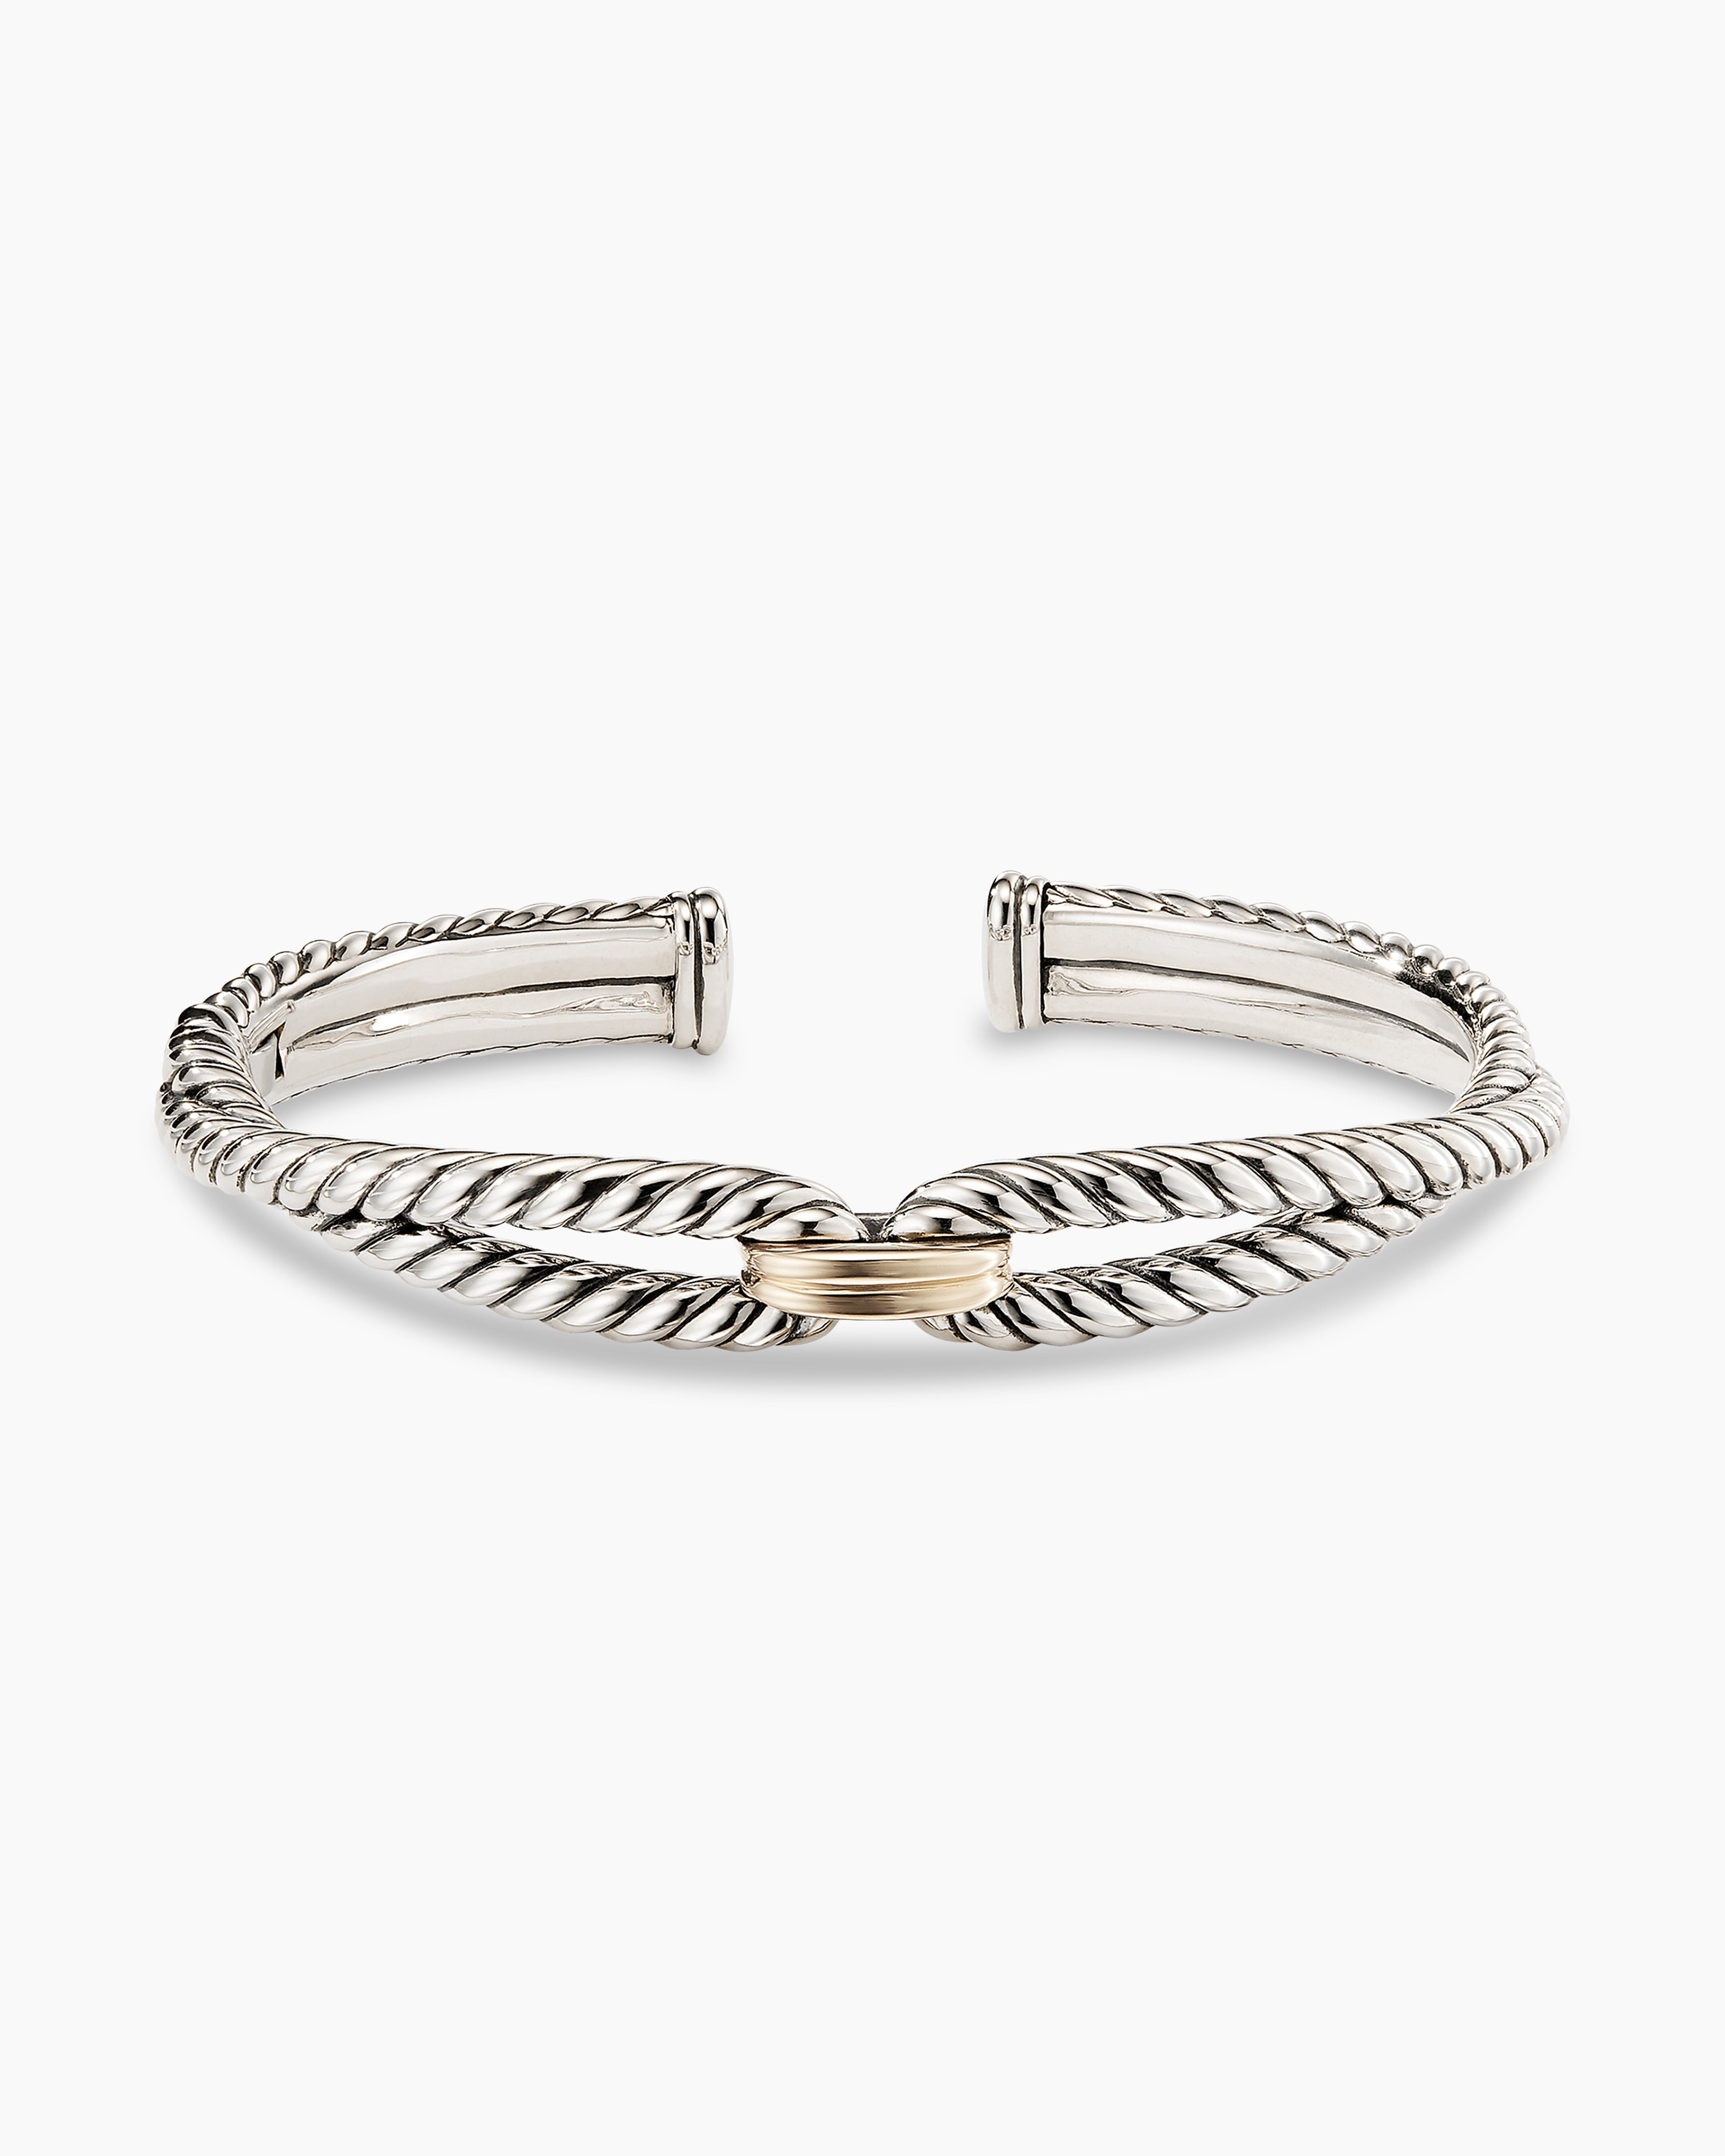 David Yurman Cable Kid's Birthstone Bracelet with Sapphire and 14K Gold |  Lee Michaels Fine Jewelry stores